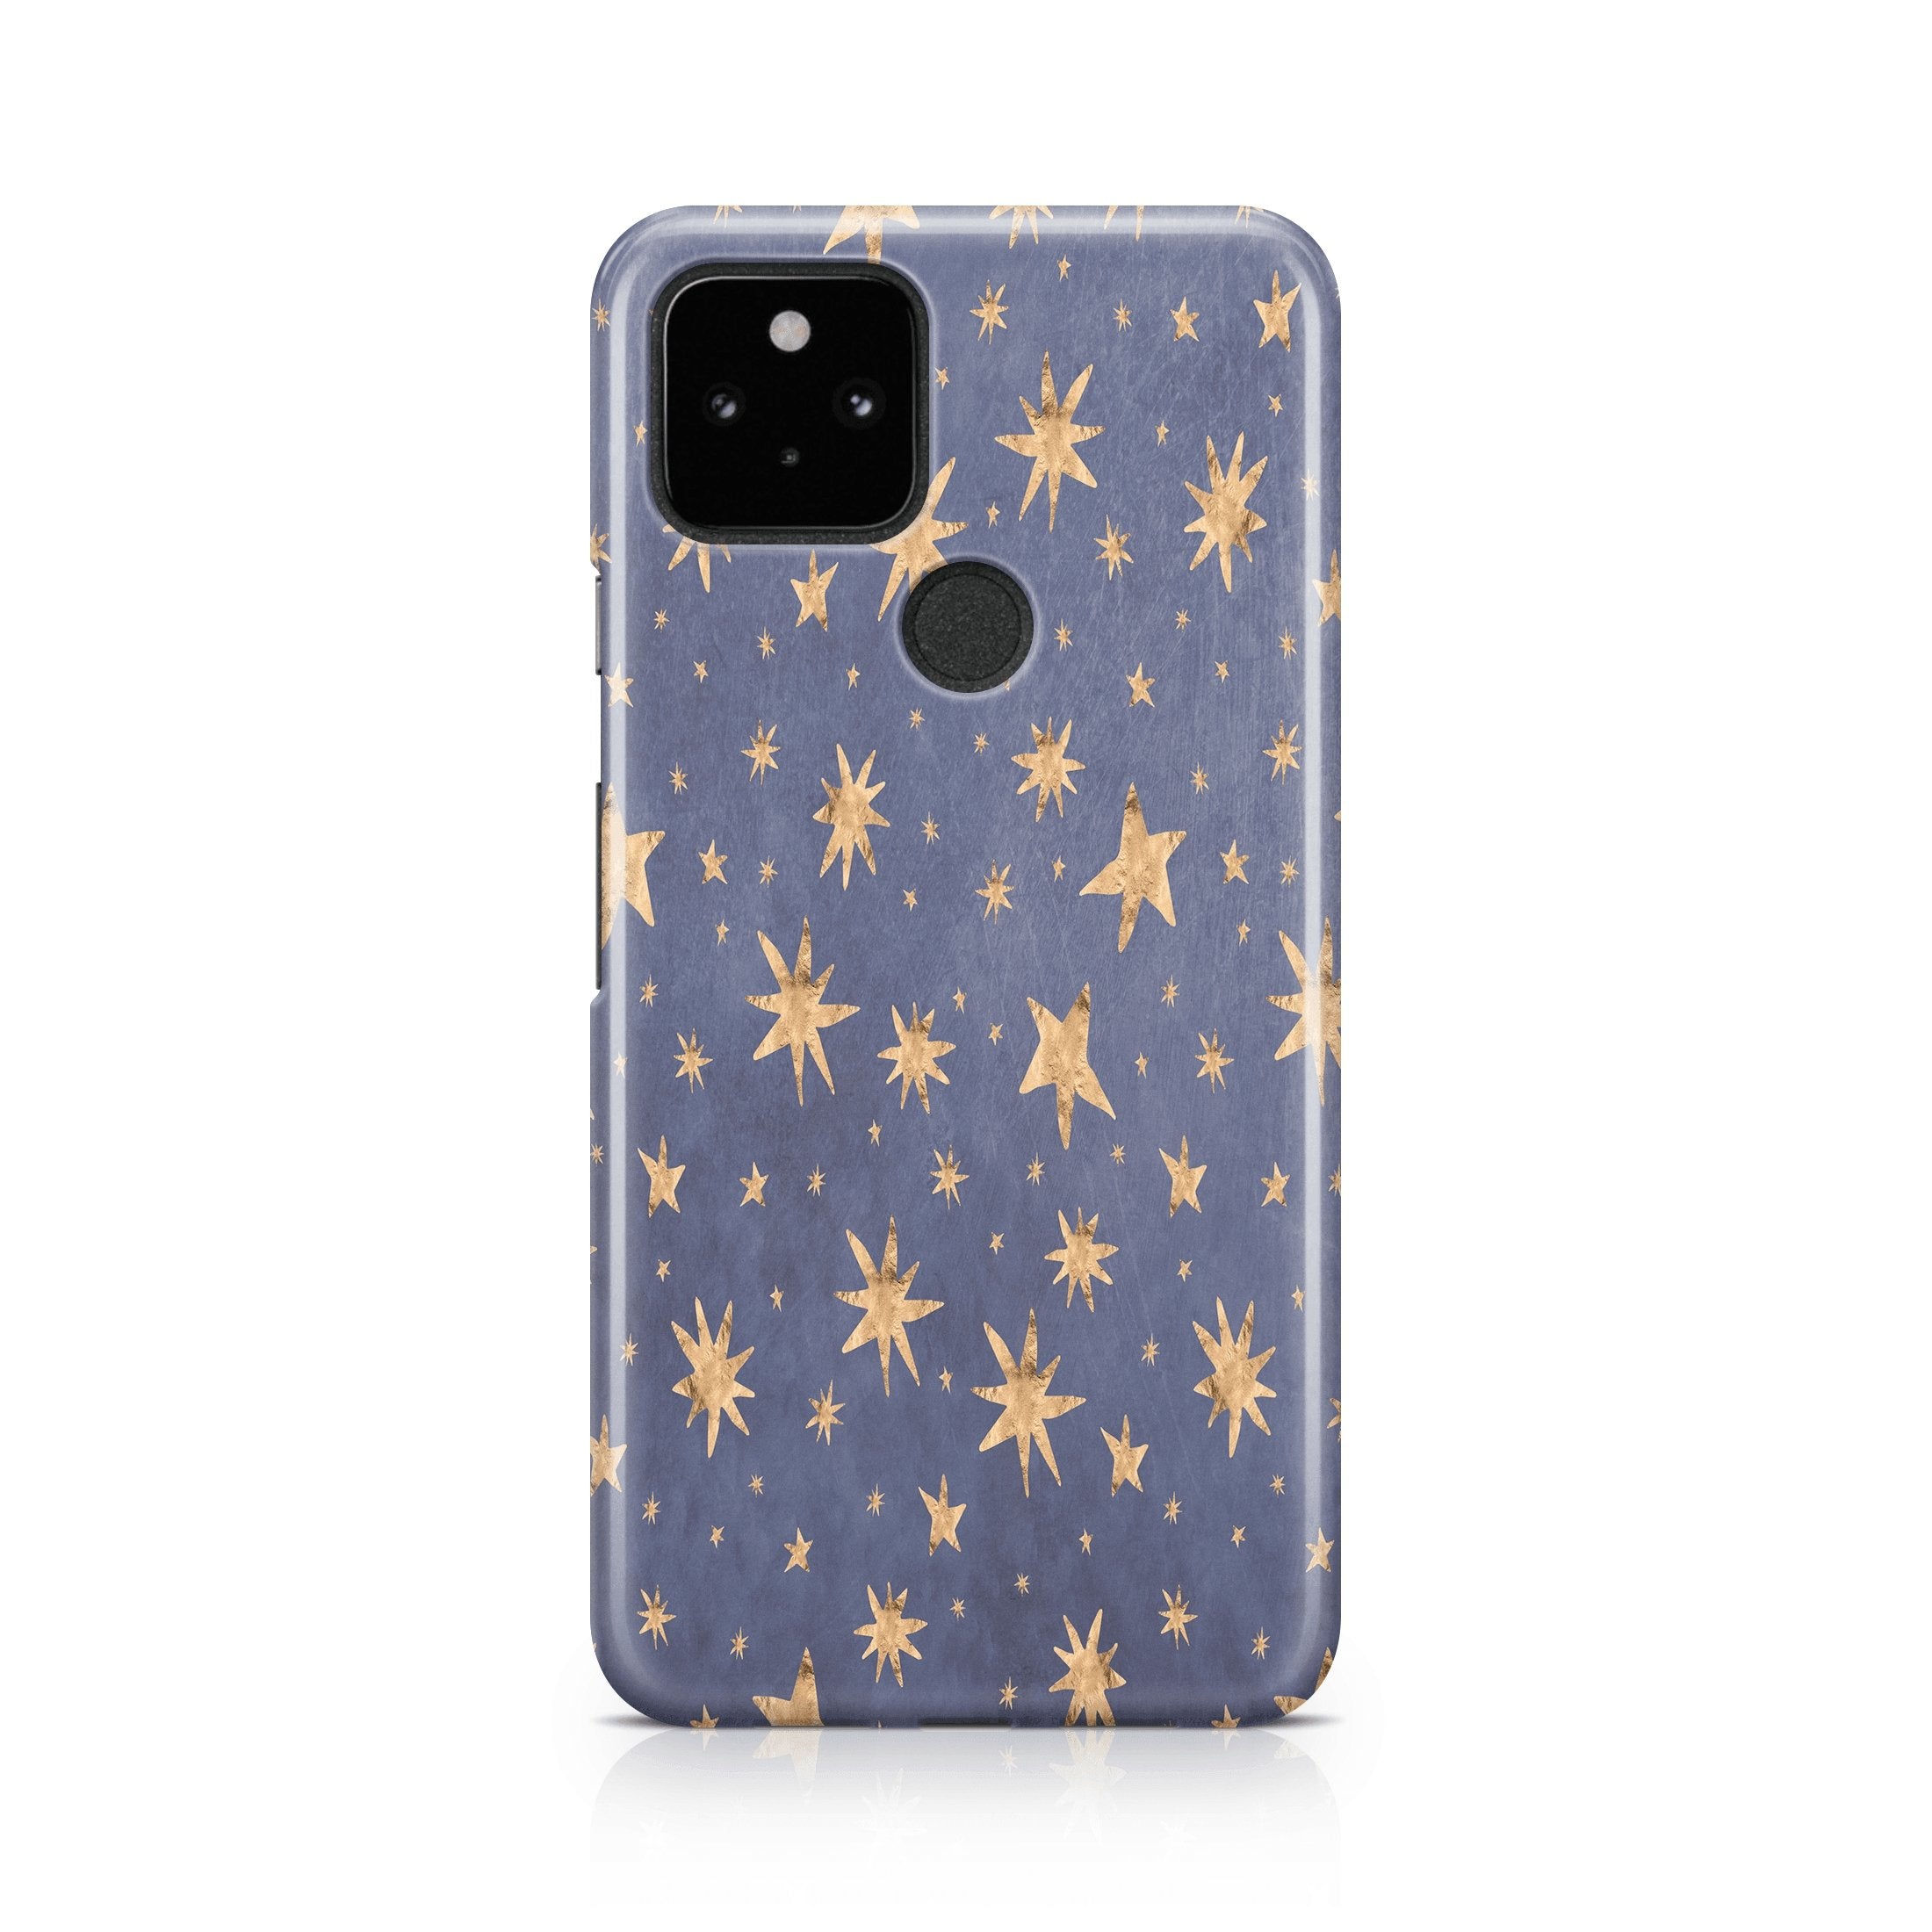 Starry Night - Google phone case designs by CaseSwagger